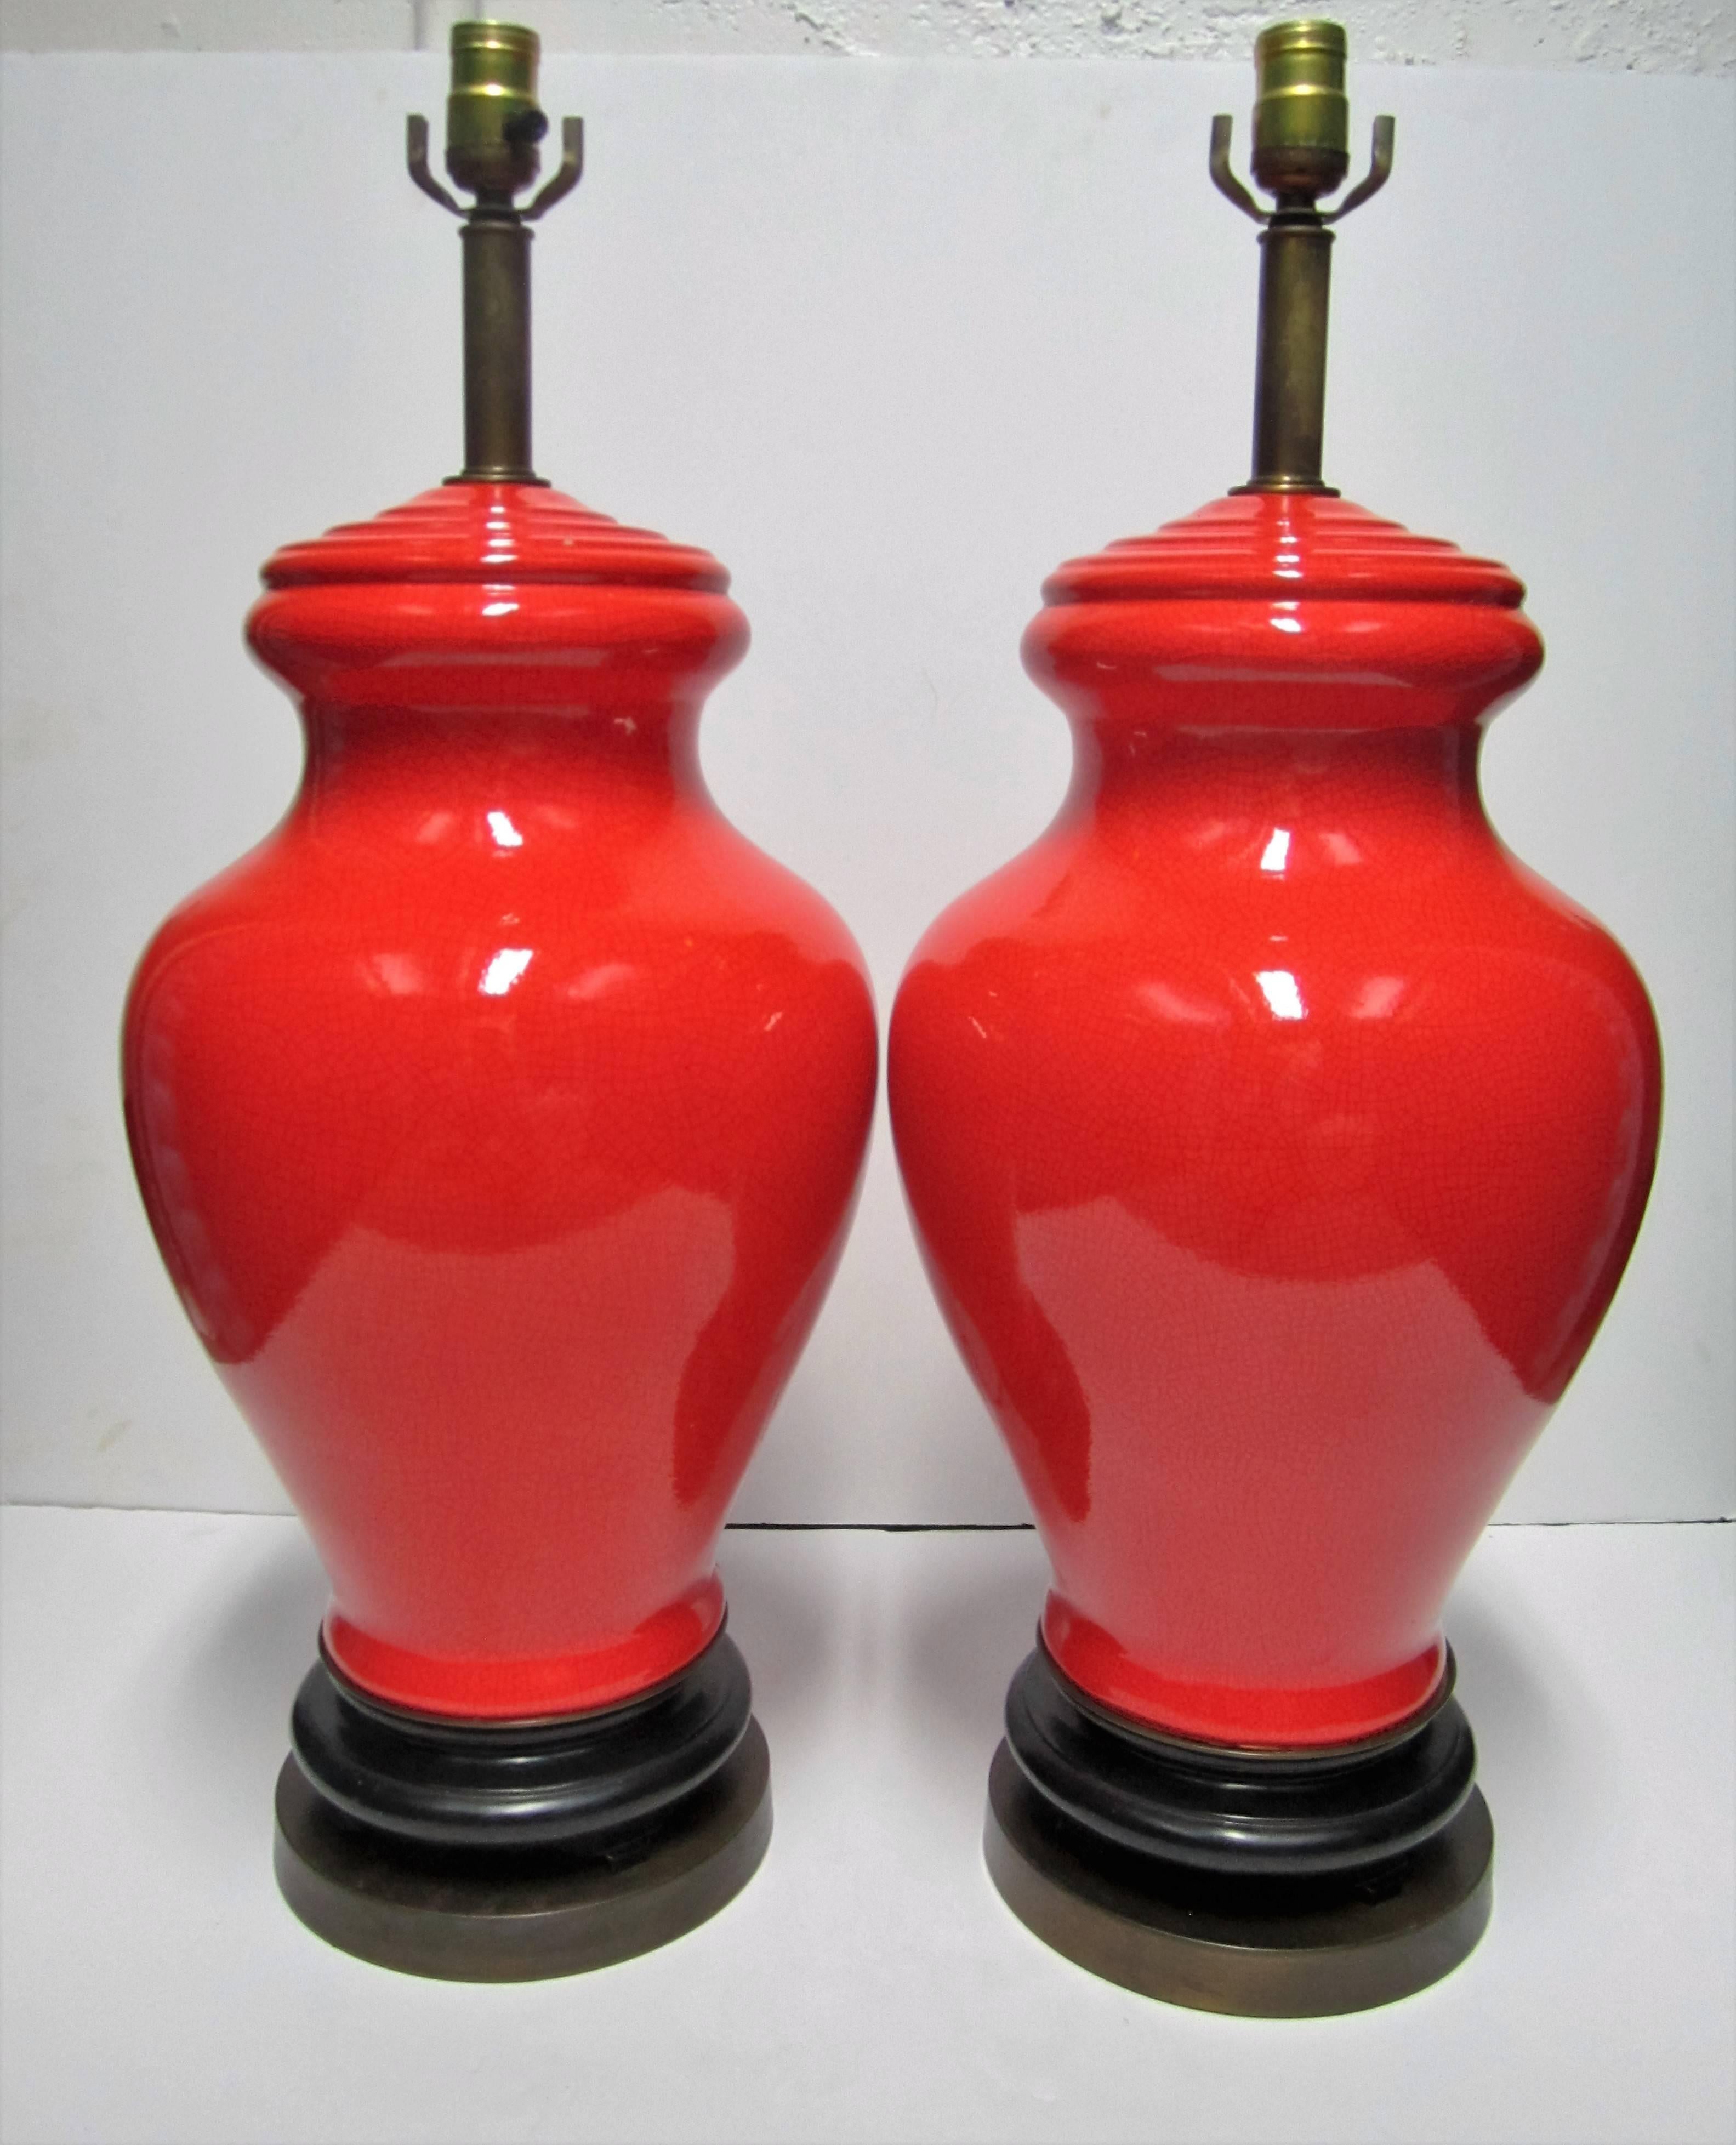 A stunning and large pair of 'geranium' red or bright red 'ginger jar' ceramic pottery table lamps with 'crackle' design on black lacquer wood and brass bases, circa 1970s. See image #5 for size perspective. In fine working order. 

Measurements